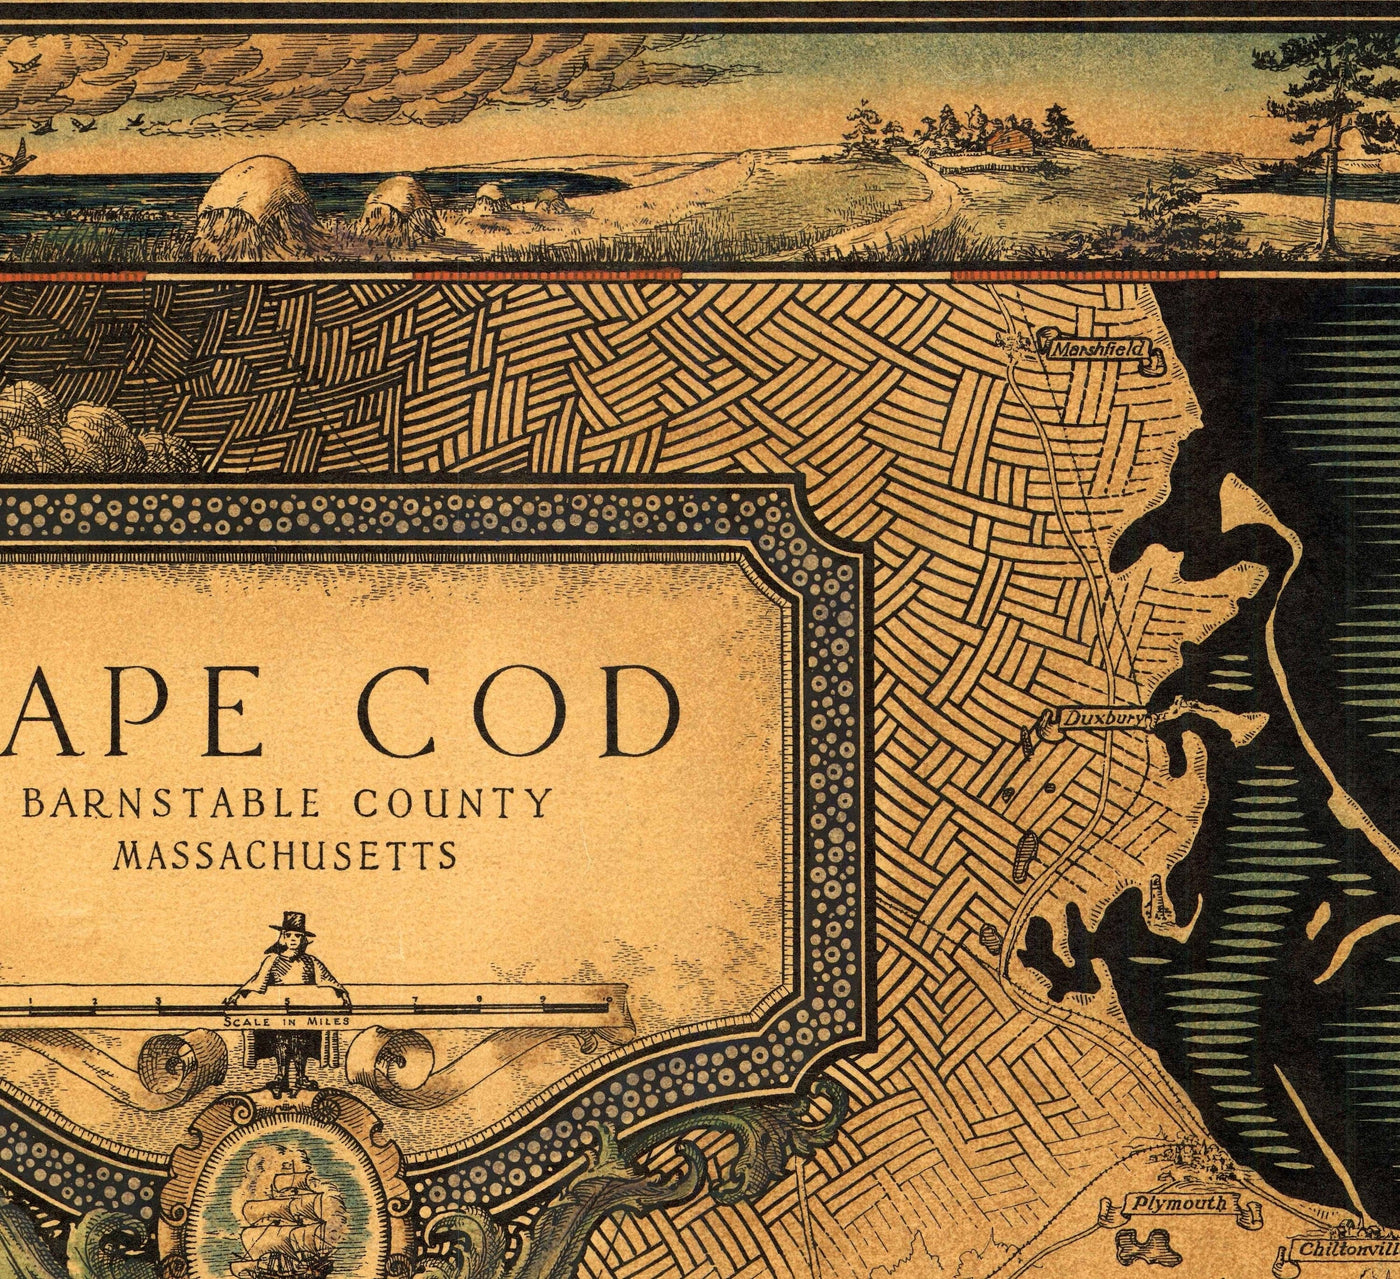 Old Map of Cape Cod, Mass. 1931 by Tripp - Martha's Vineyard, Barnstaple, Plymouth, New Bedford, Bourne, Falmouth, Yarmouth